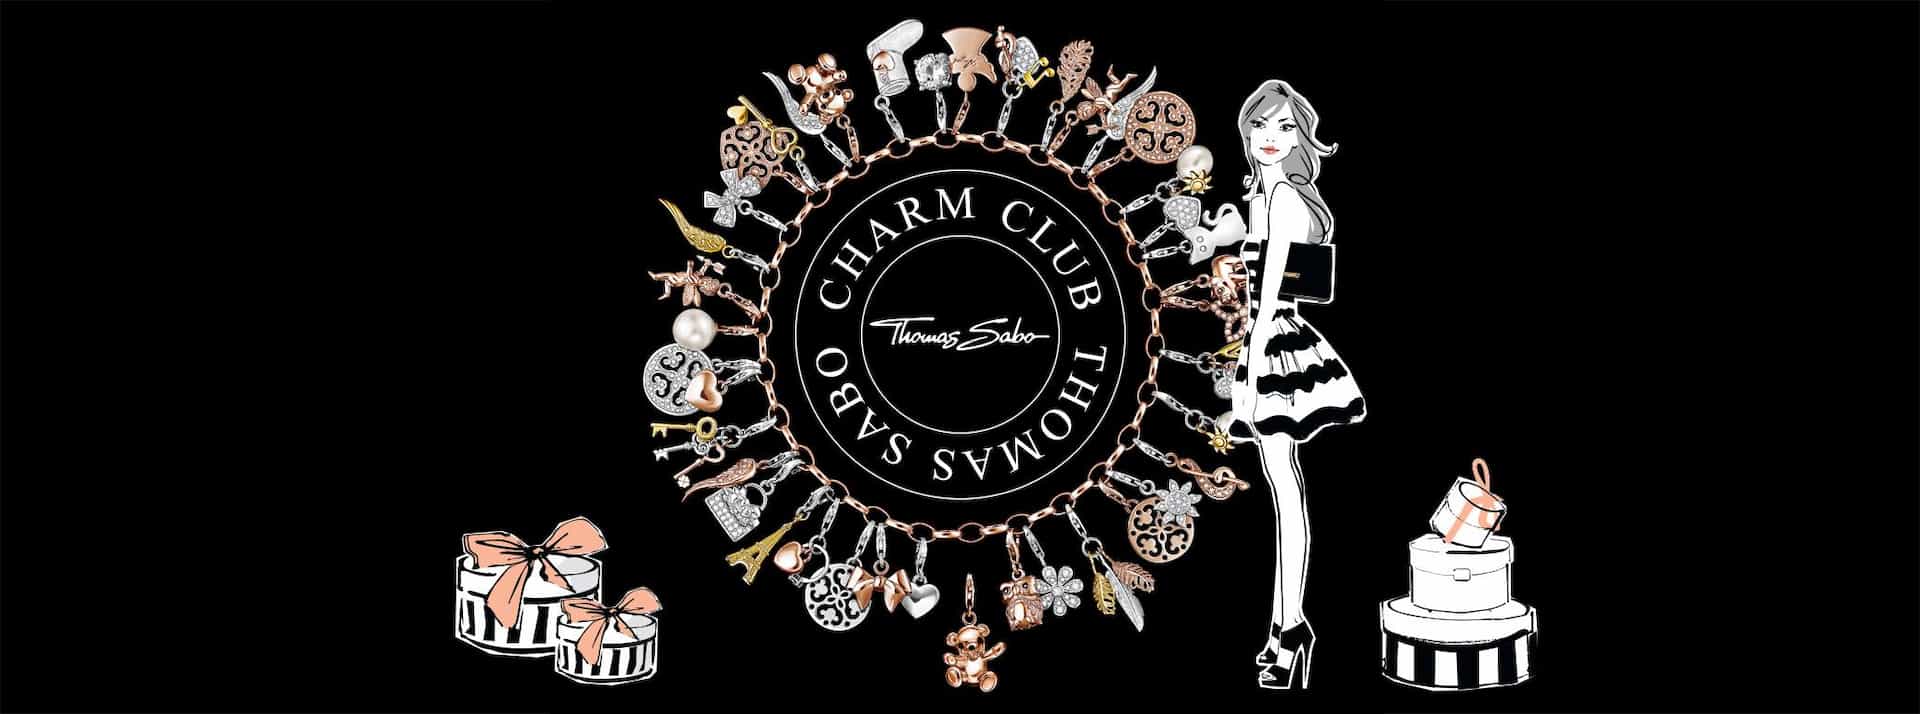 10% Off your first order when you sign up at Thomas Sabo